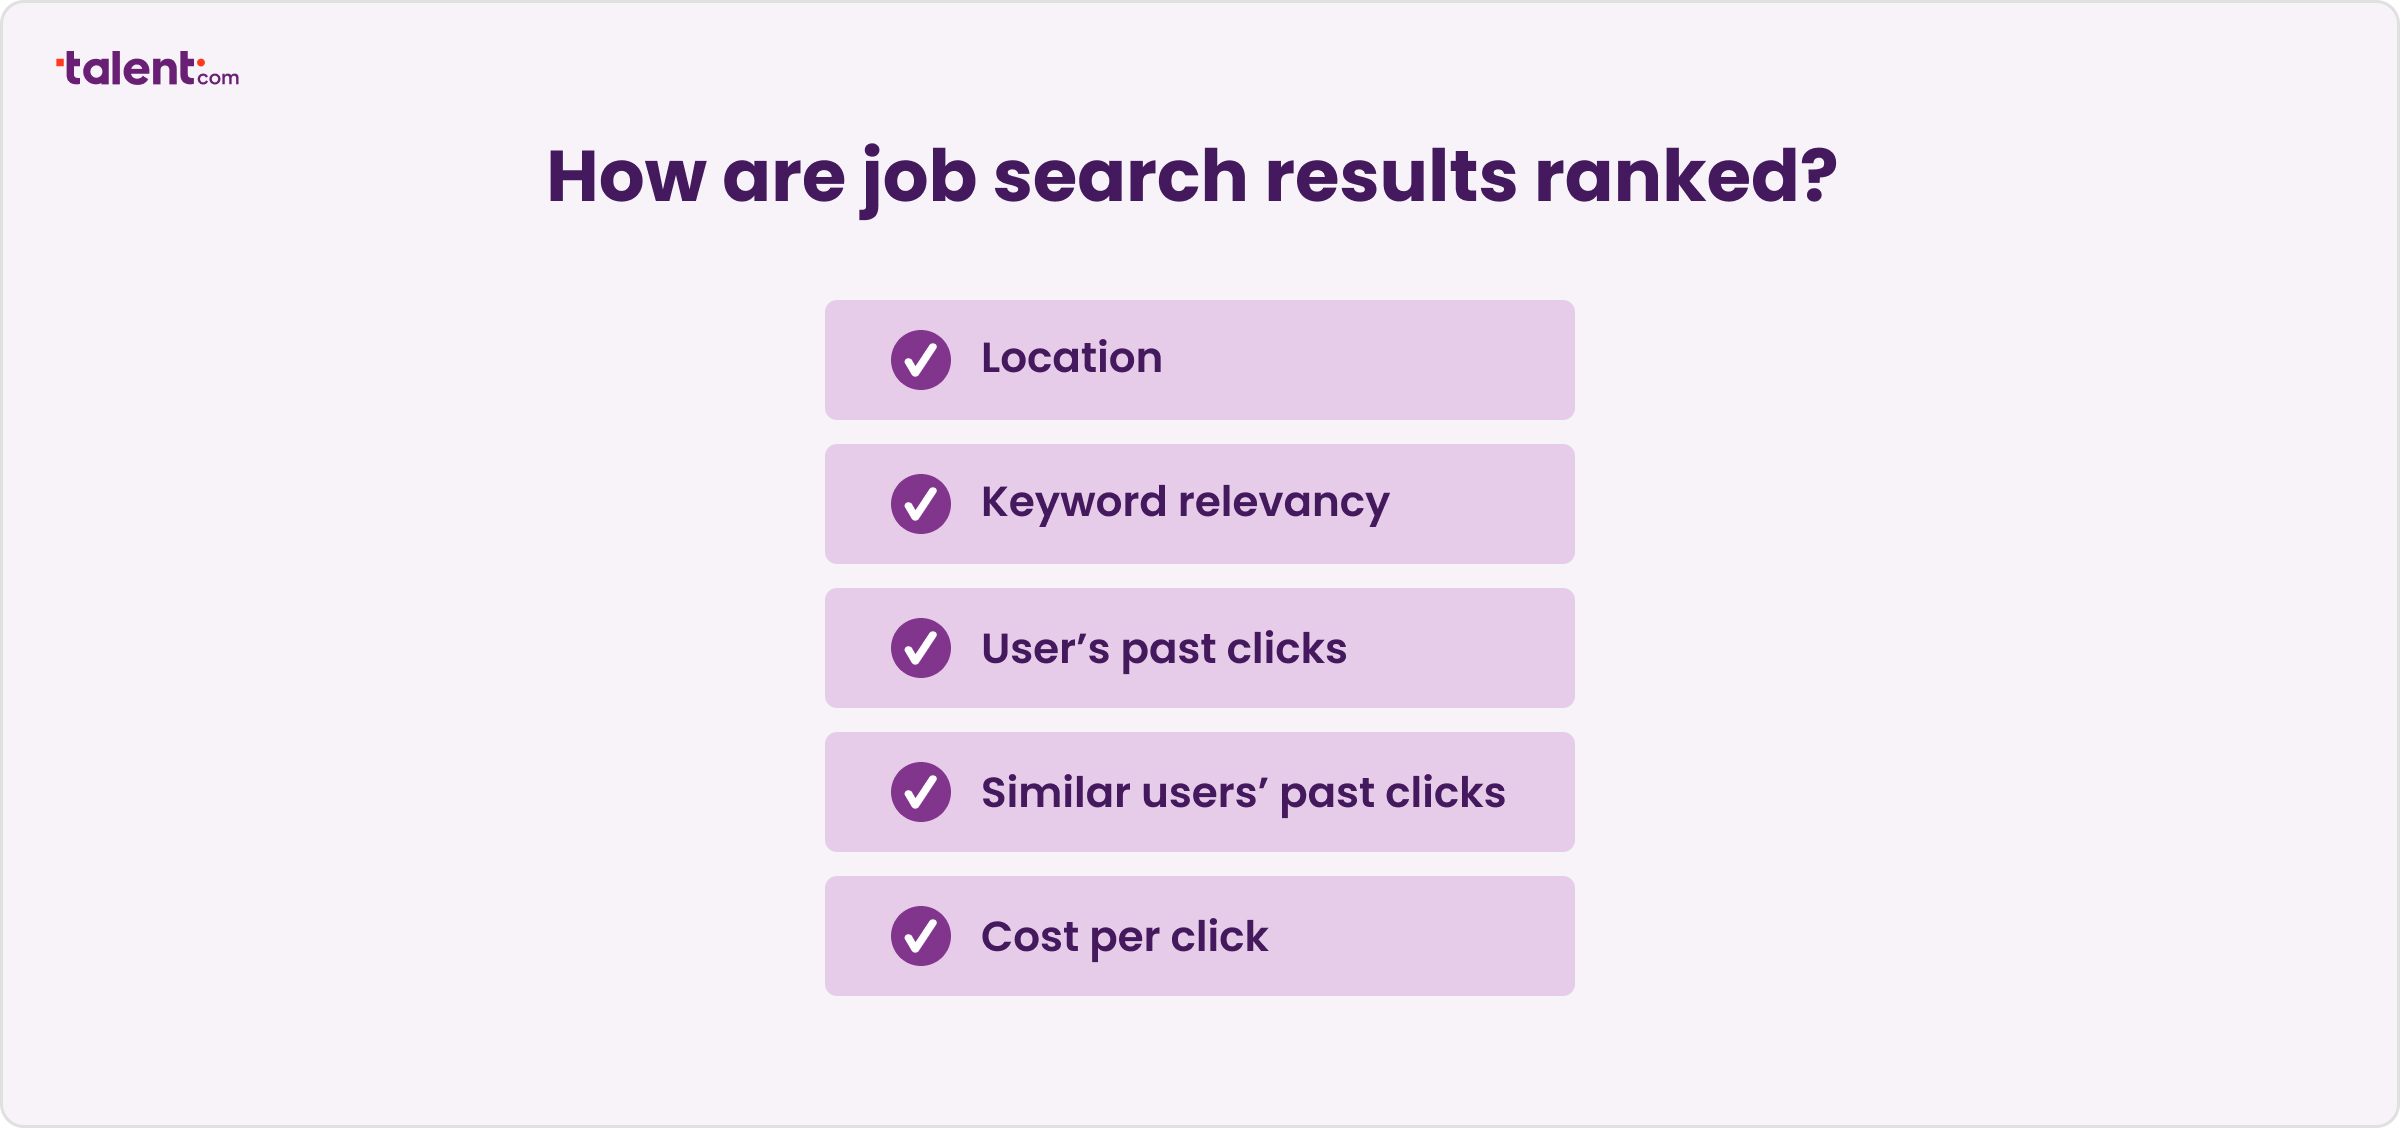 Job search results are ranked according to location, keyword relevancy, a user's past clicks, similar users' past clicks, and cost per click.